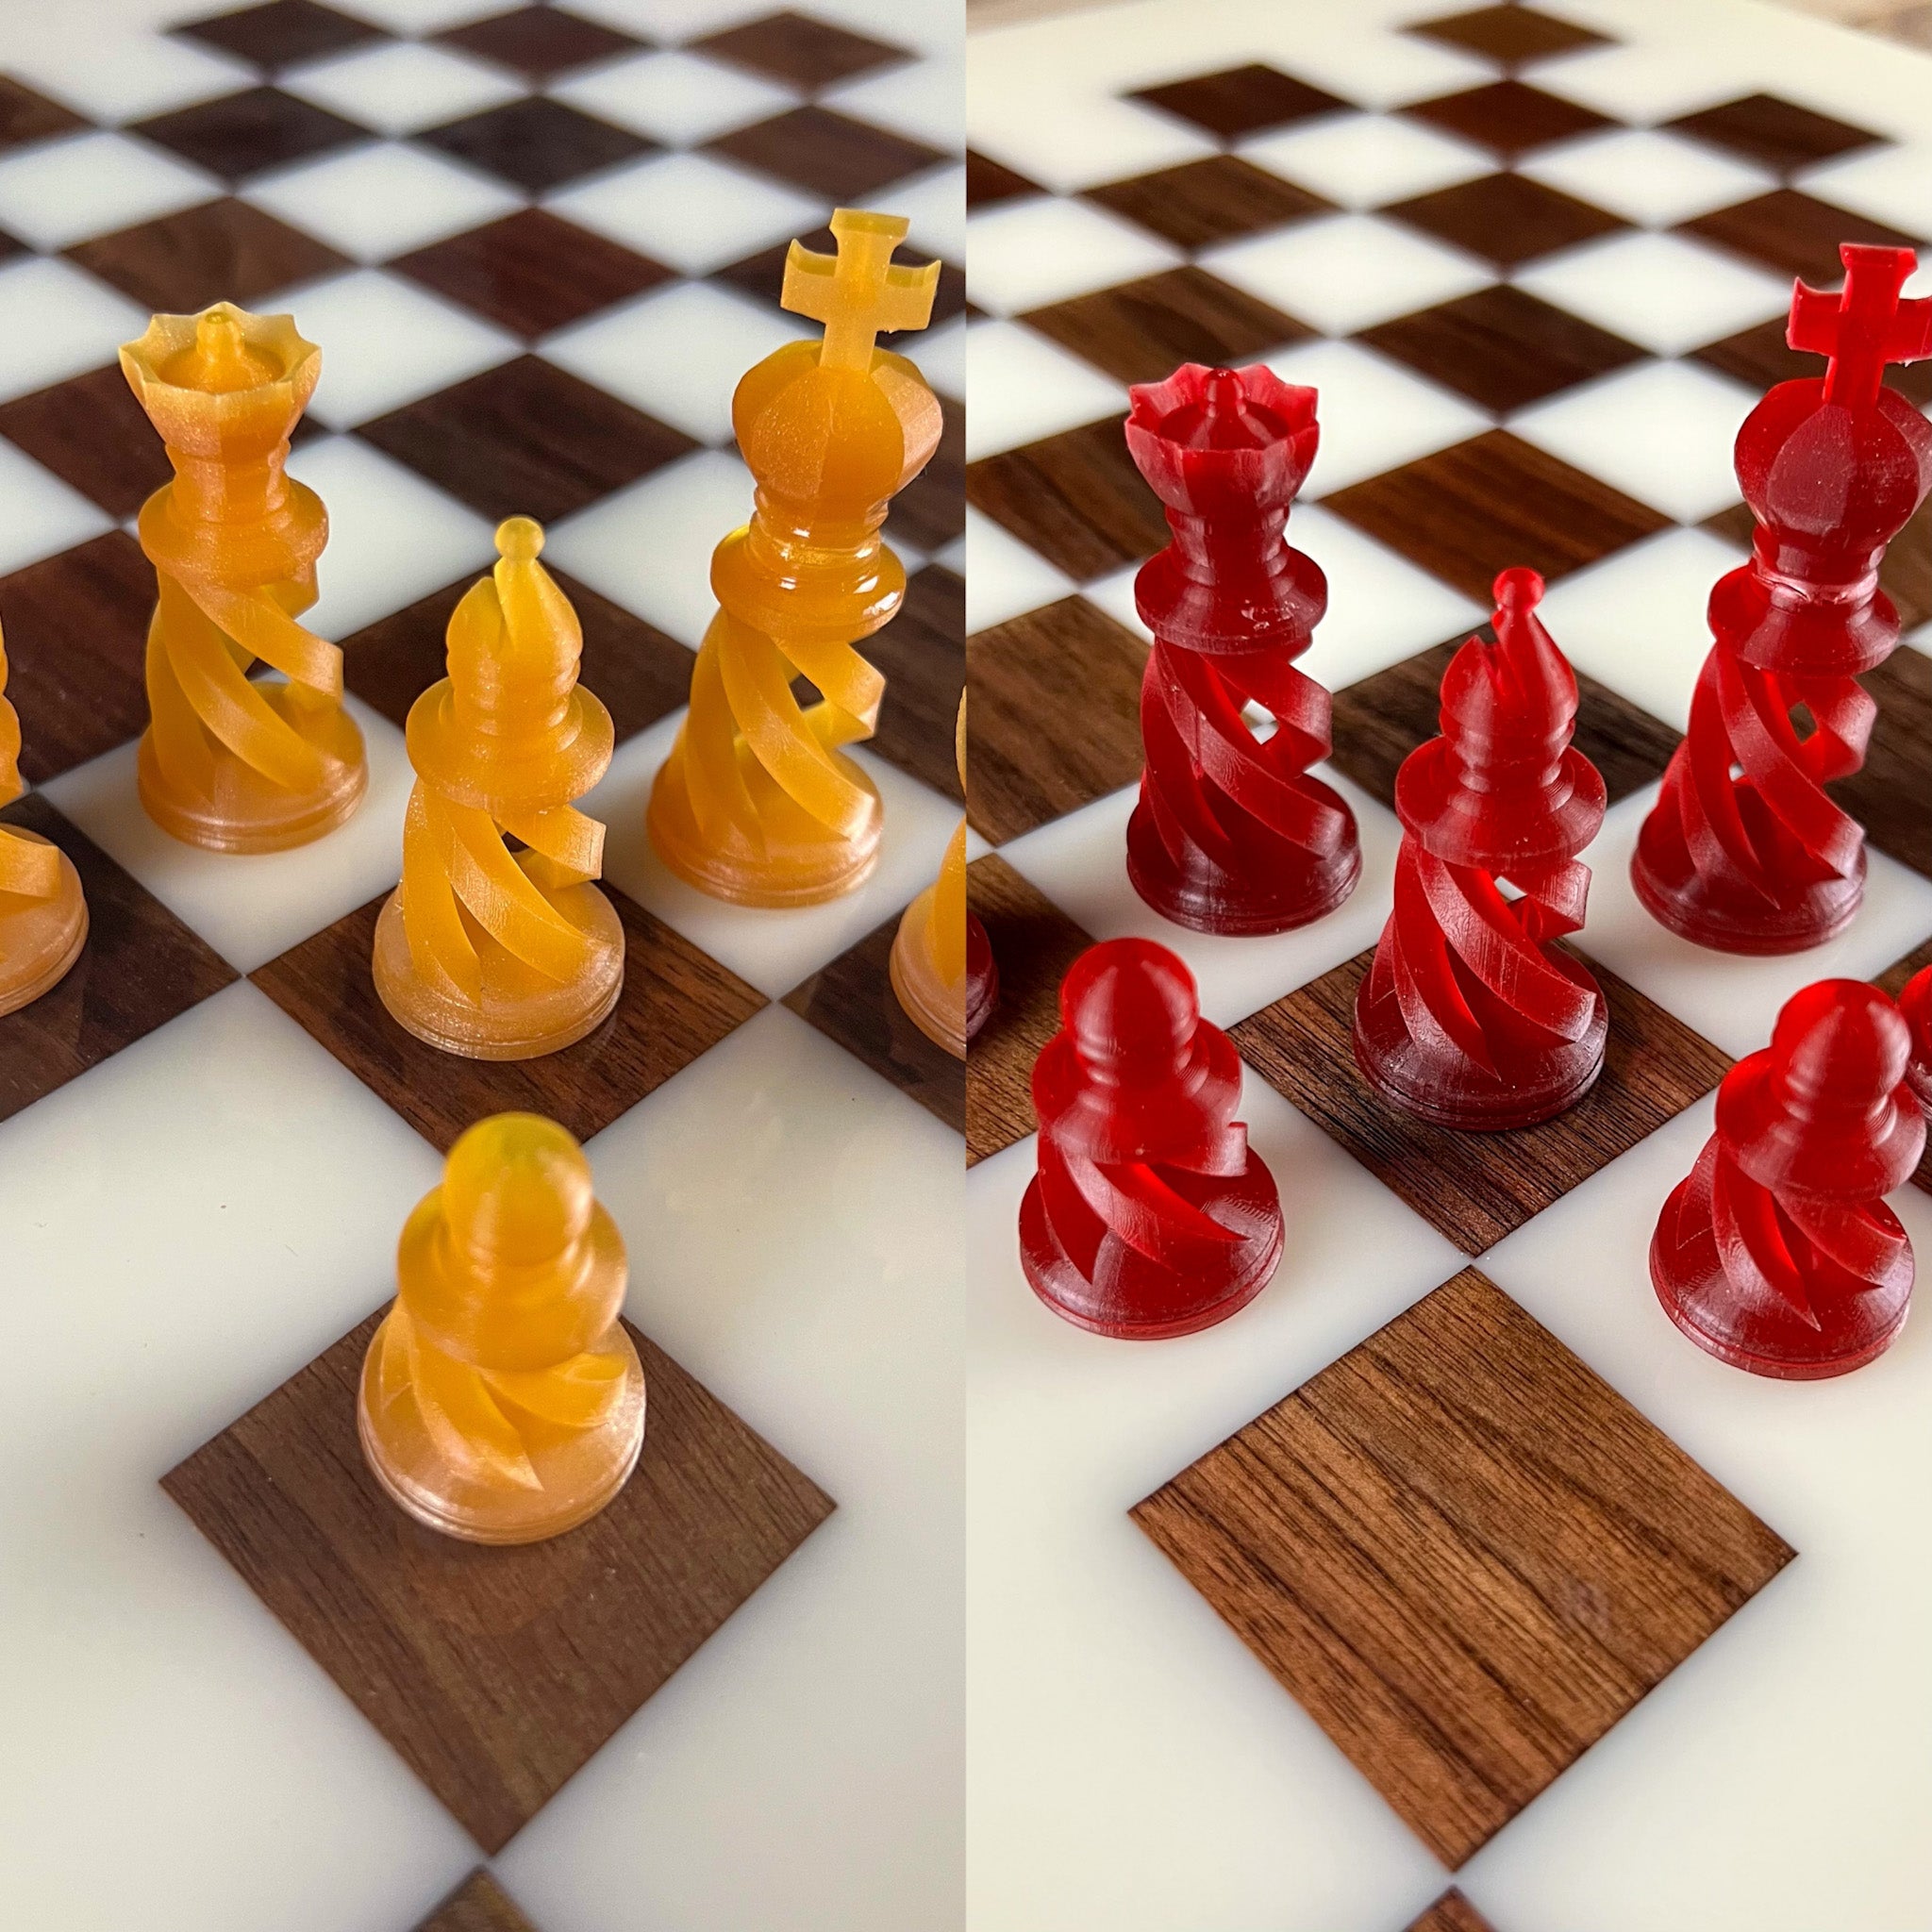 Ocean Cloud Maple Wood Chess Board (With Border)